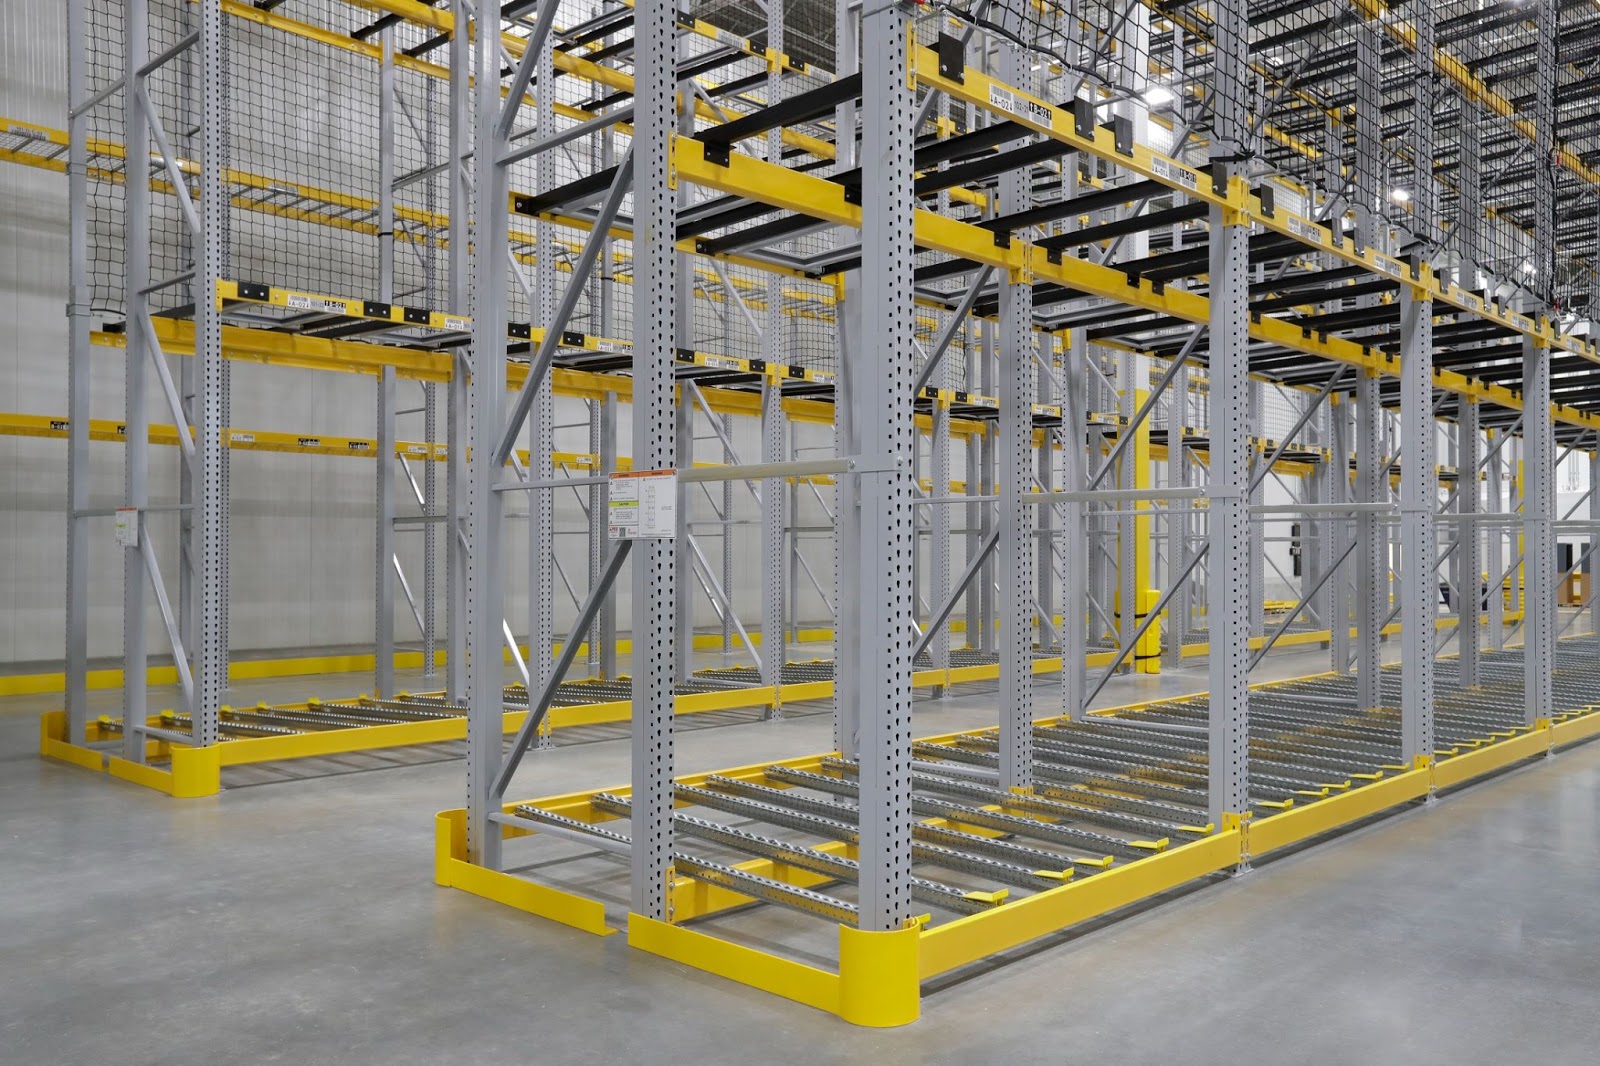 Pallet Rack Safety Features